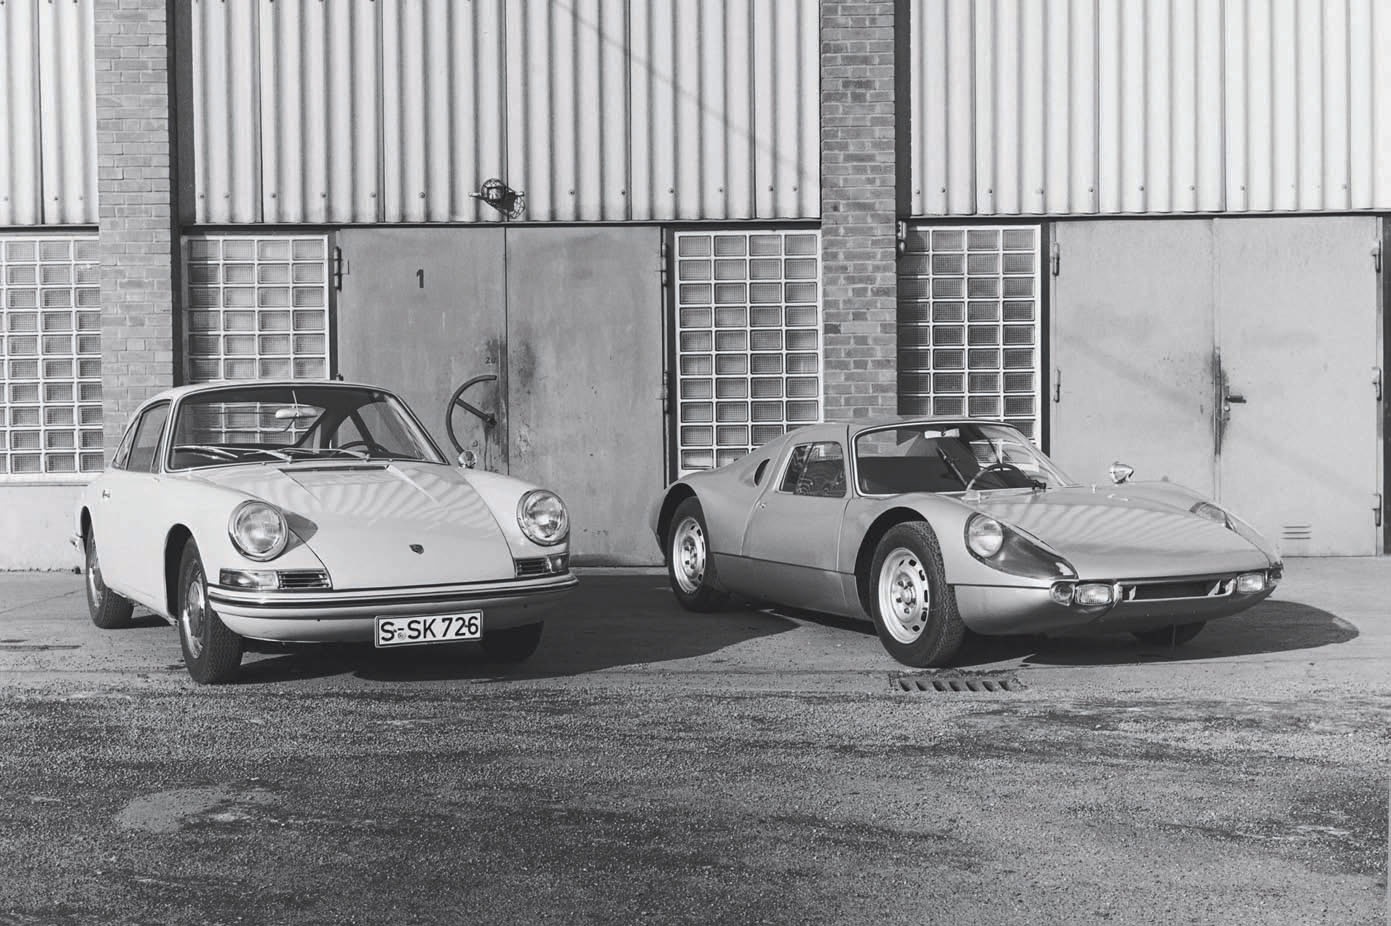 The 911 and the 904: On the left was the race-legal road car and on the right was a road-legal race car. Especially for international rallies, such as the Monte Carlo, these two models often competed together but in different classes. Porsche Archiv